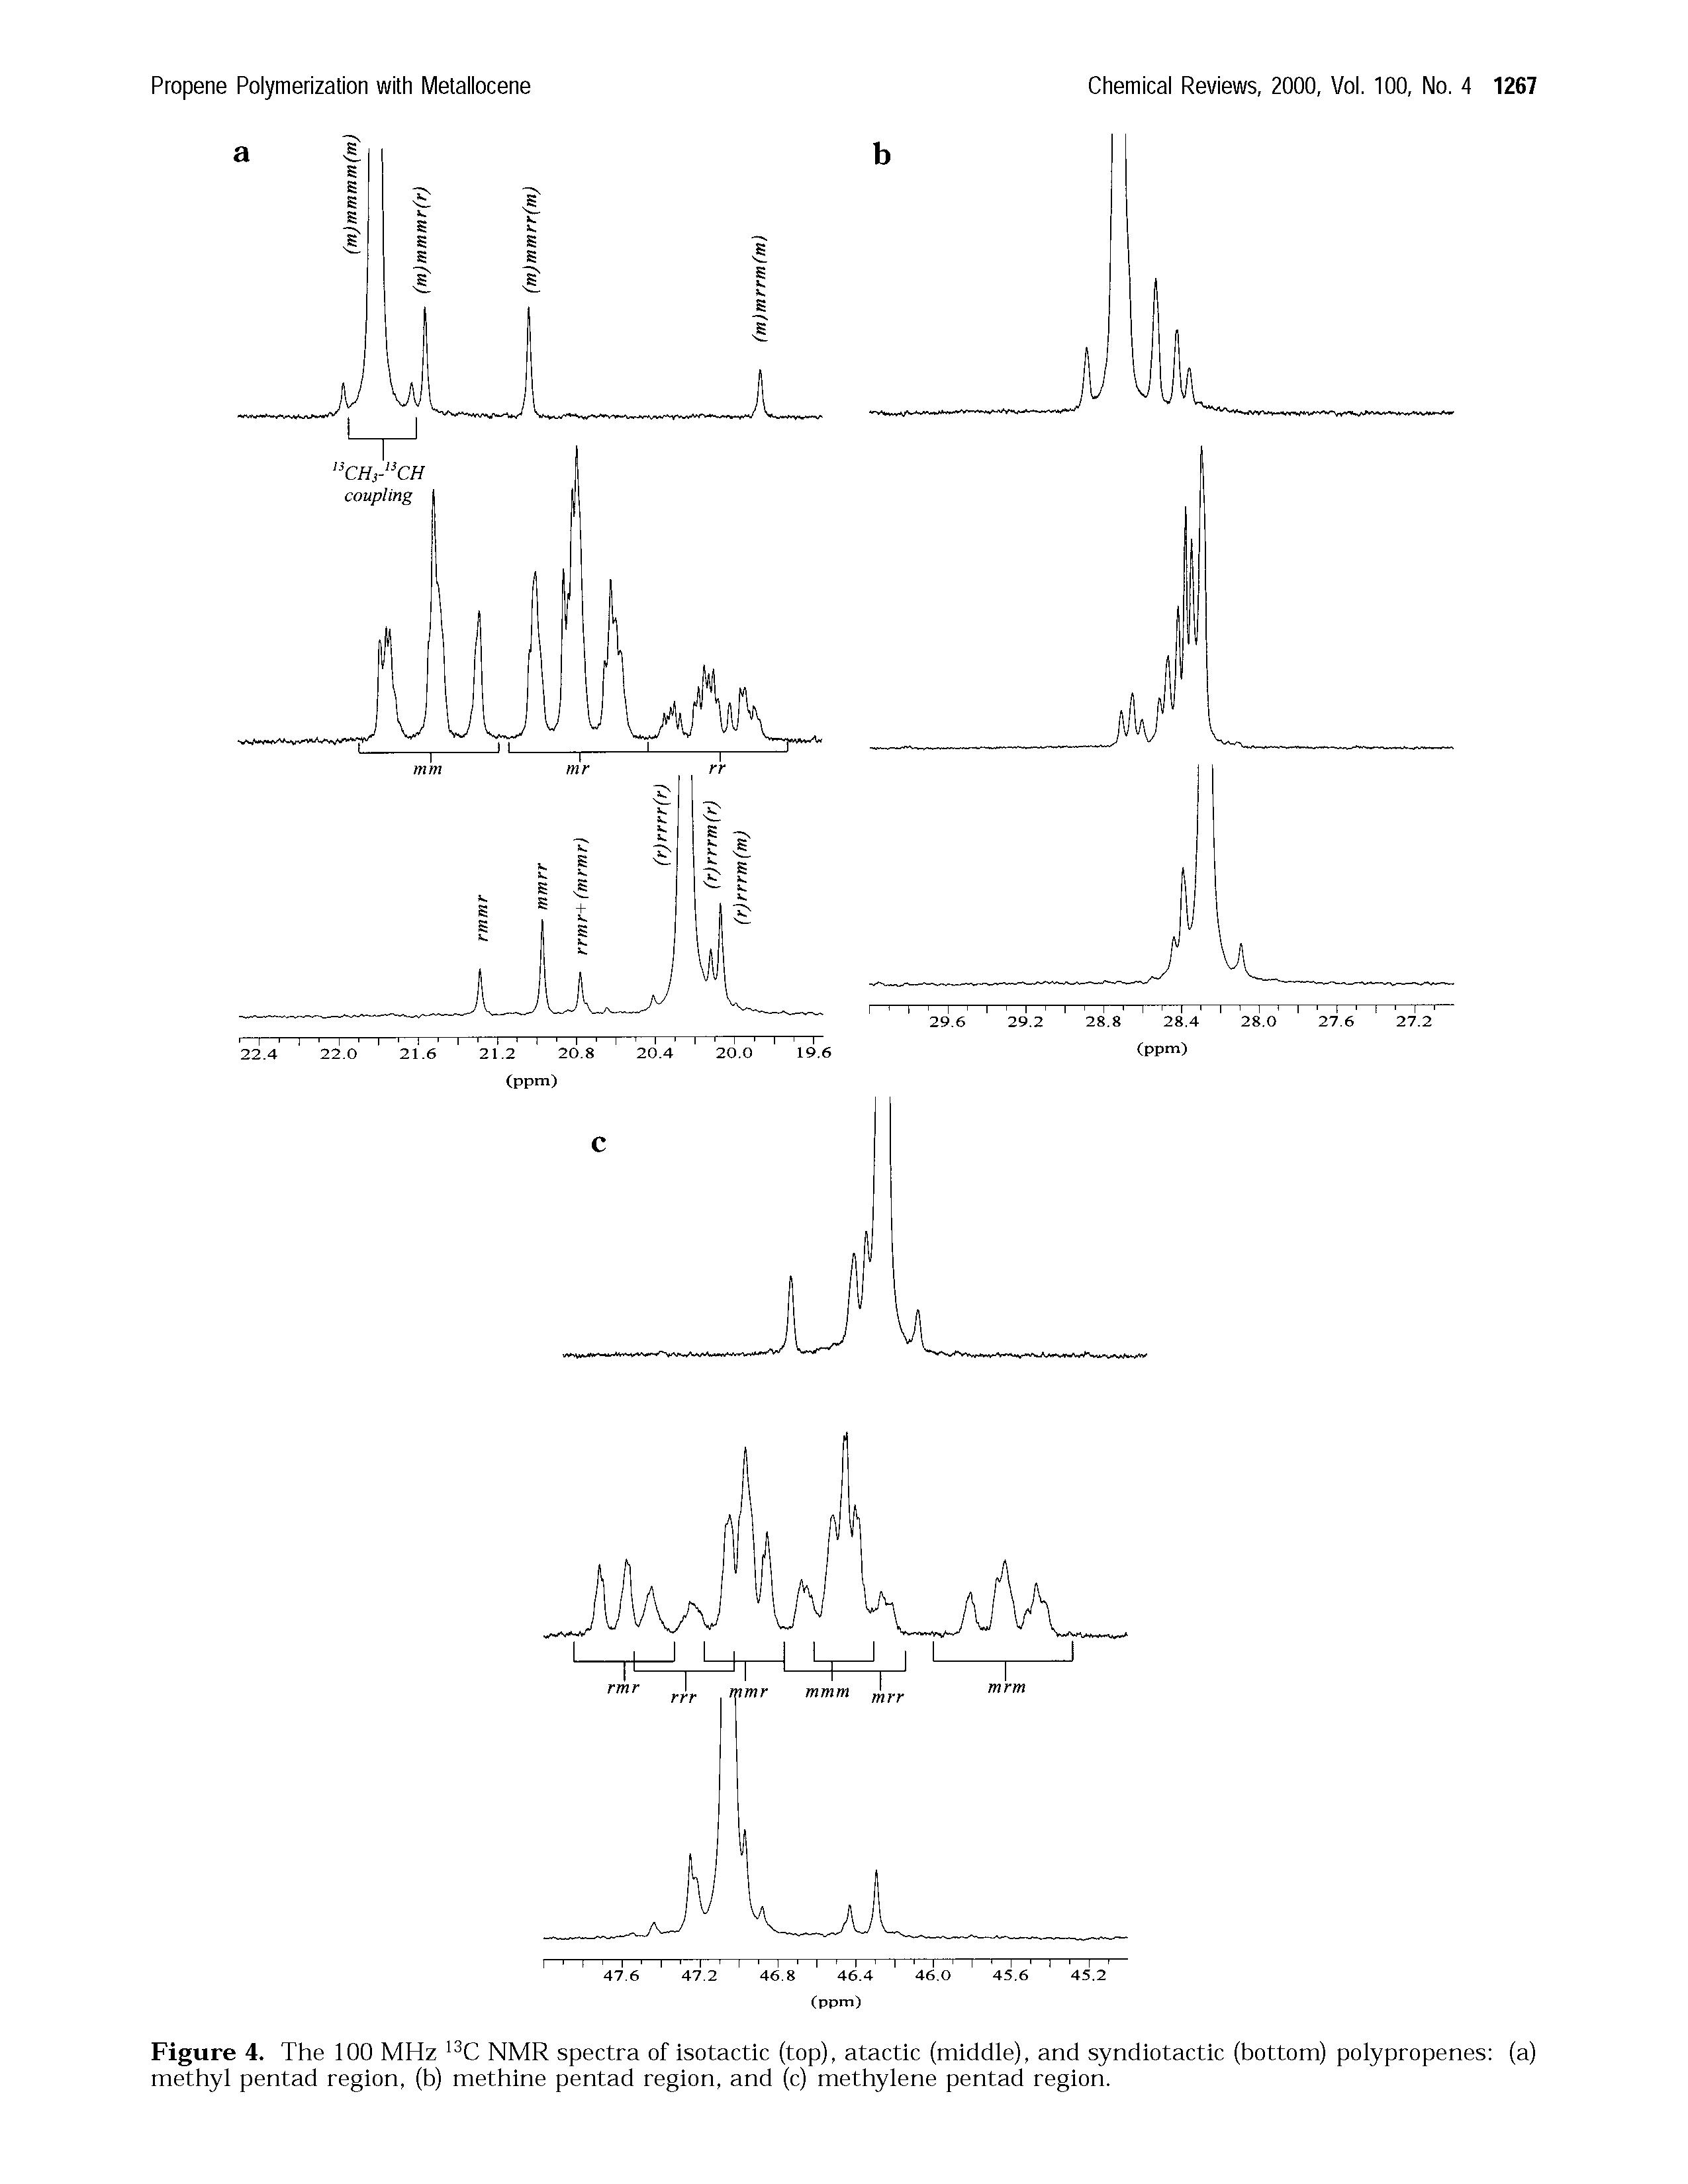 Figure 4. The 100 MHz NMR spectra of isotactic (top), atactic (middle), and syndiotactic (bottom) polypropenes (a) methyl pentad region, (b) methine pentad region, and (c) methylene pentad region.